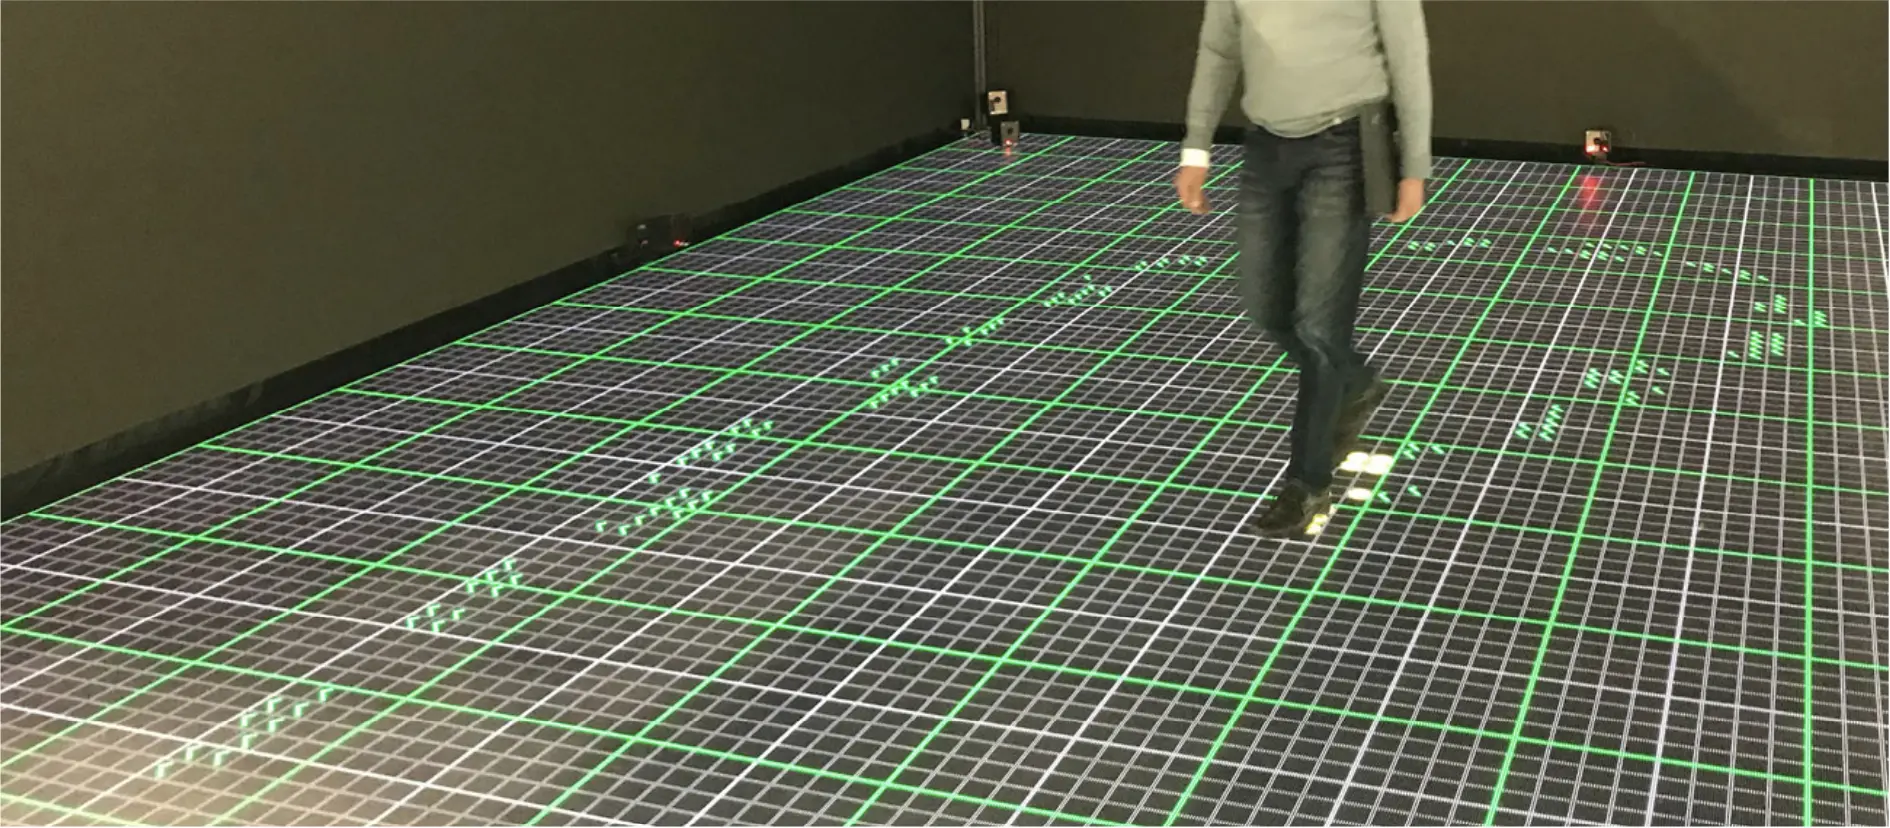 Using Large-Scale Augmented Floor Surfaces for Industrial Applications and Evaluation on Perceived Sizes